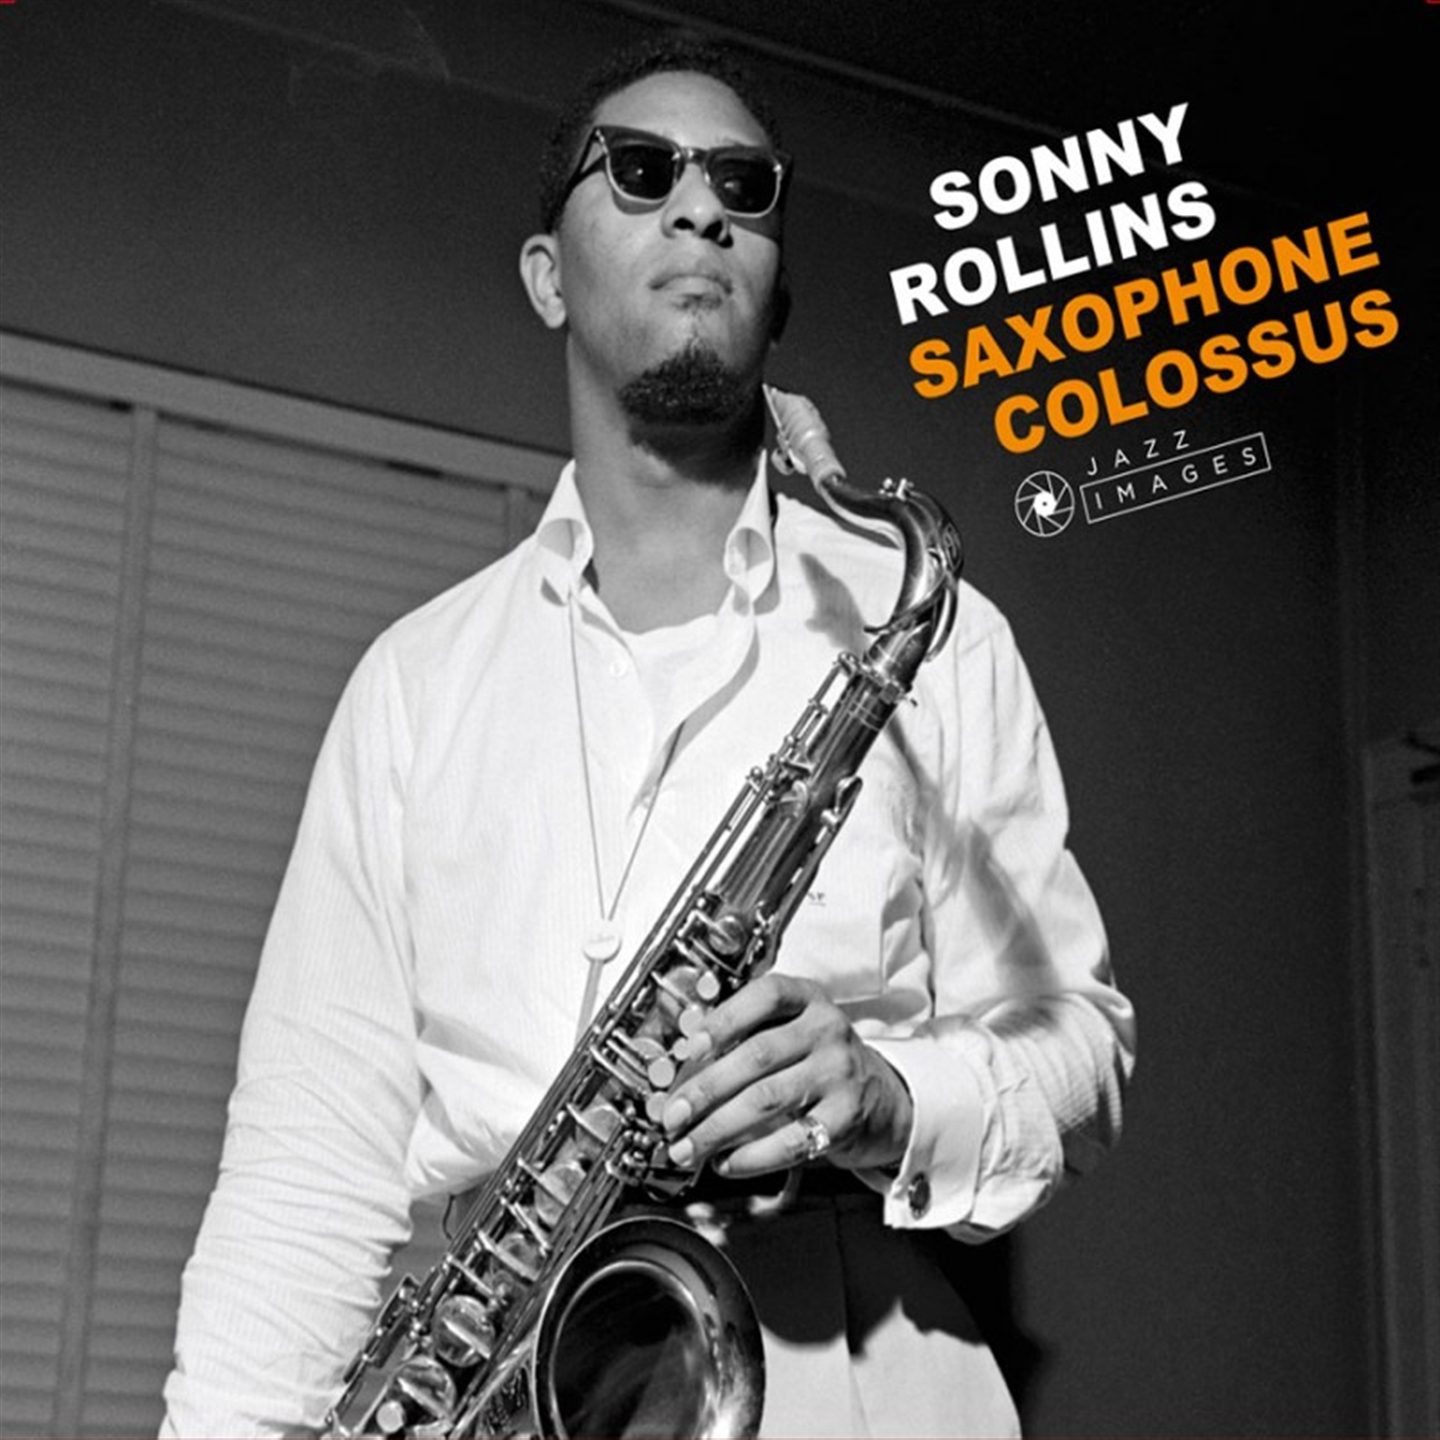 SAXOPHONE COLOSSUS (+ THE SOUND OF SONNY +WAY OUT WEST + NEWK'S TIME)